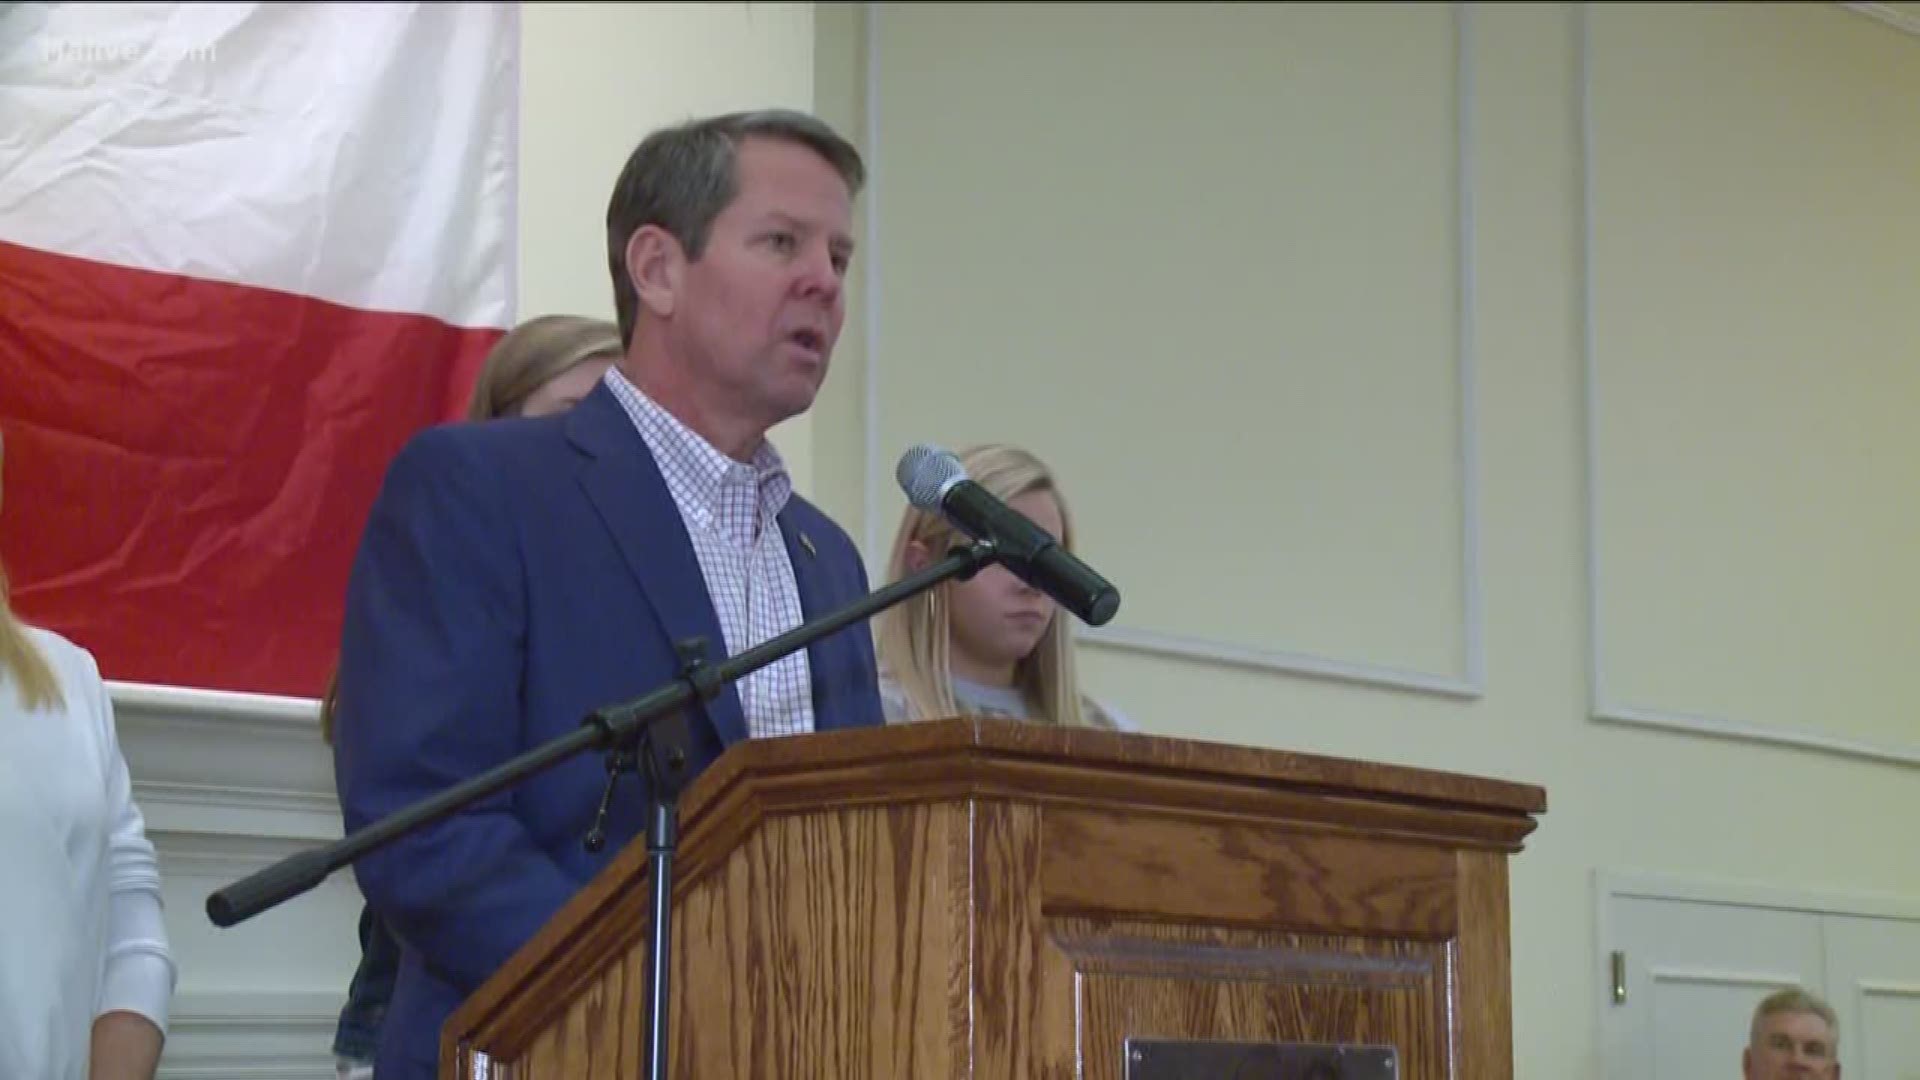 Despite Brian Kemp preparing to take the Oath of Office as Georgia's new governor, protests are still taking place from people who are still upset over his November election victory.